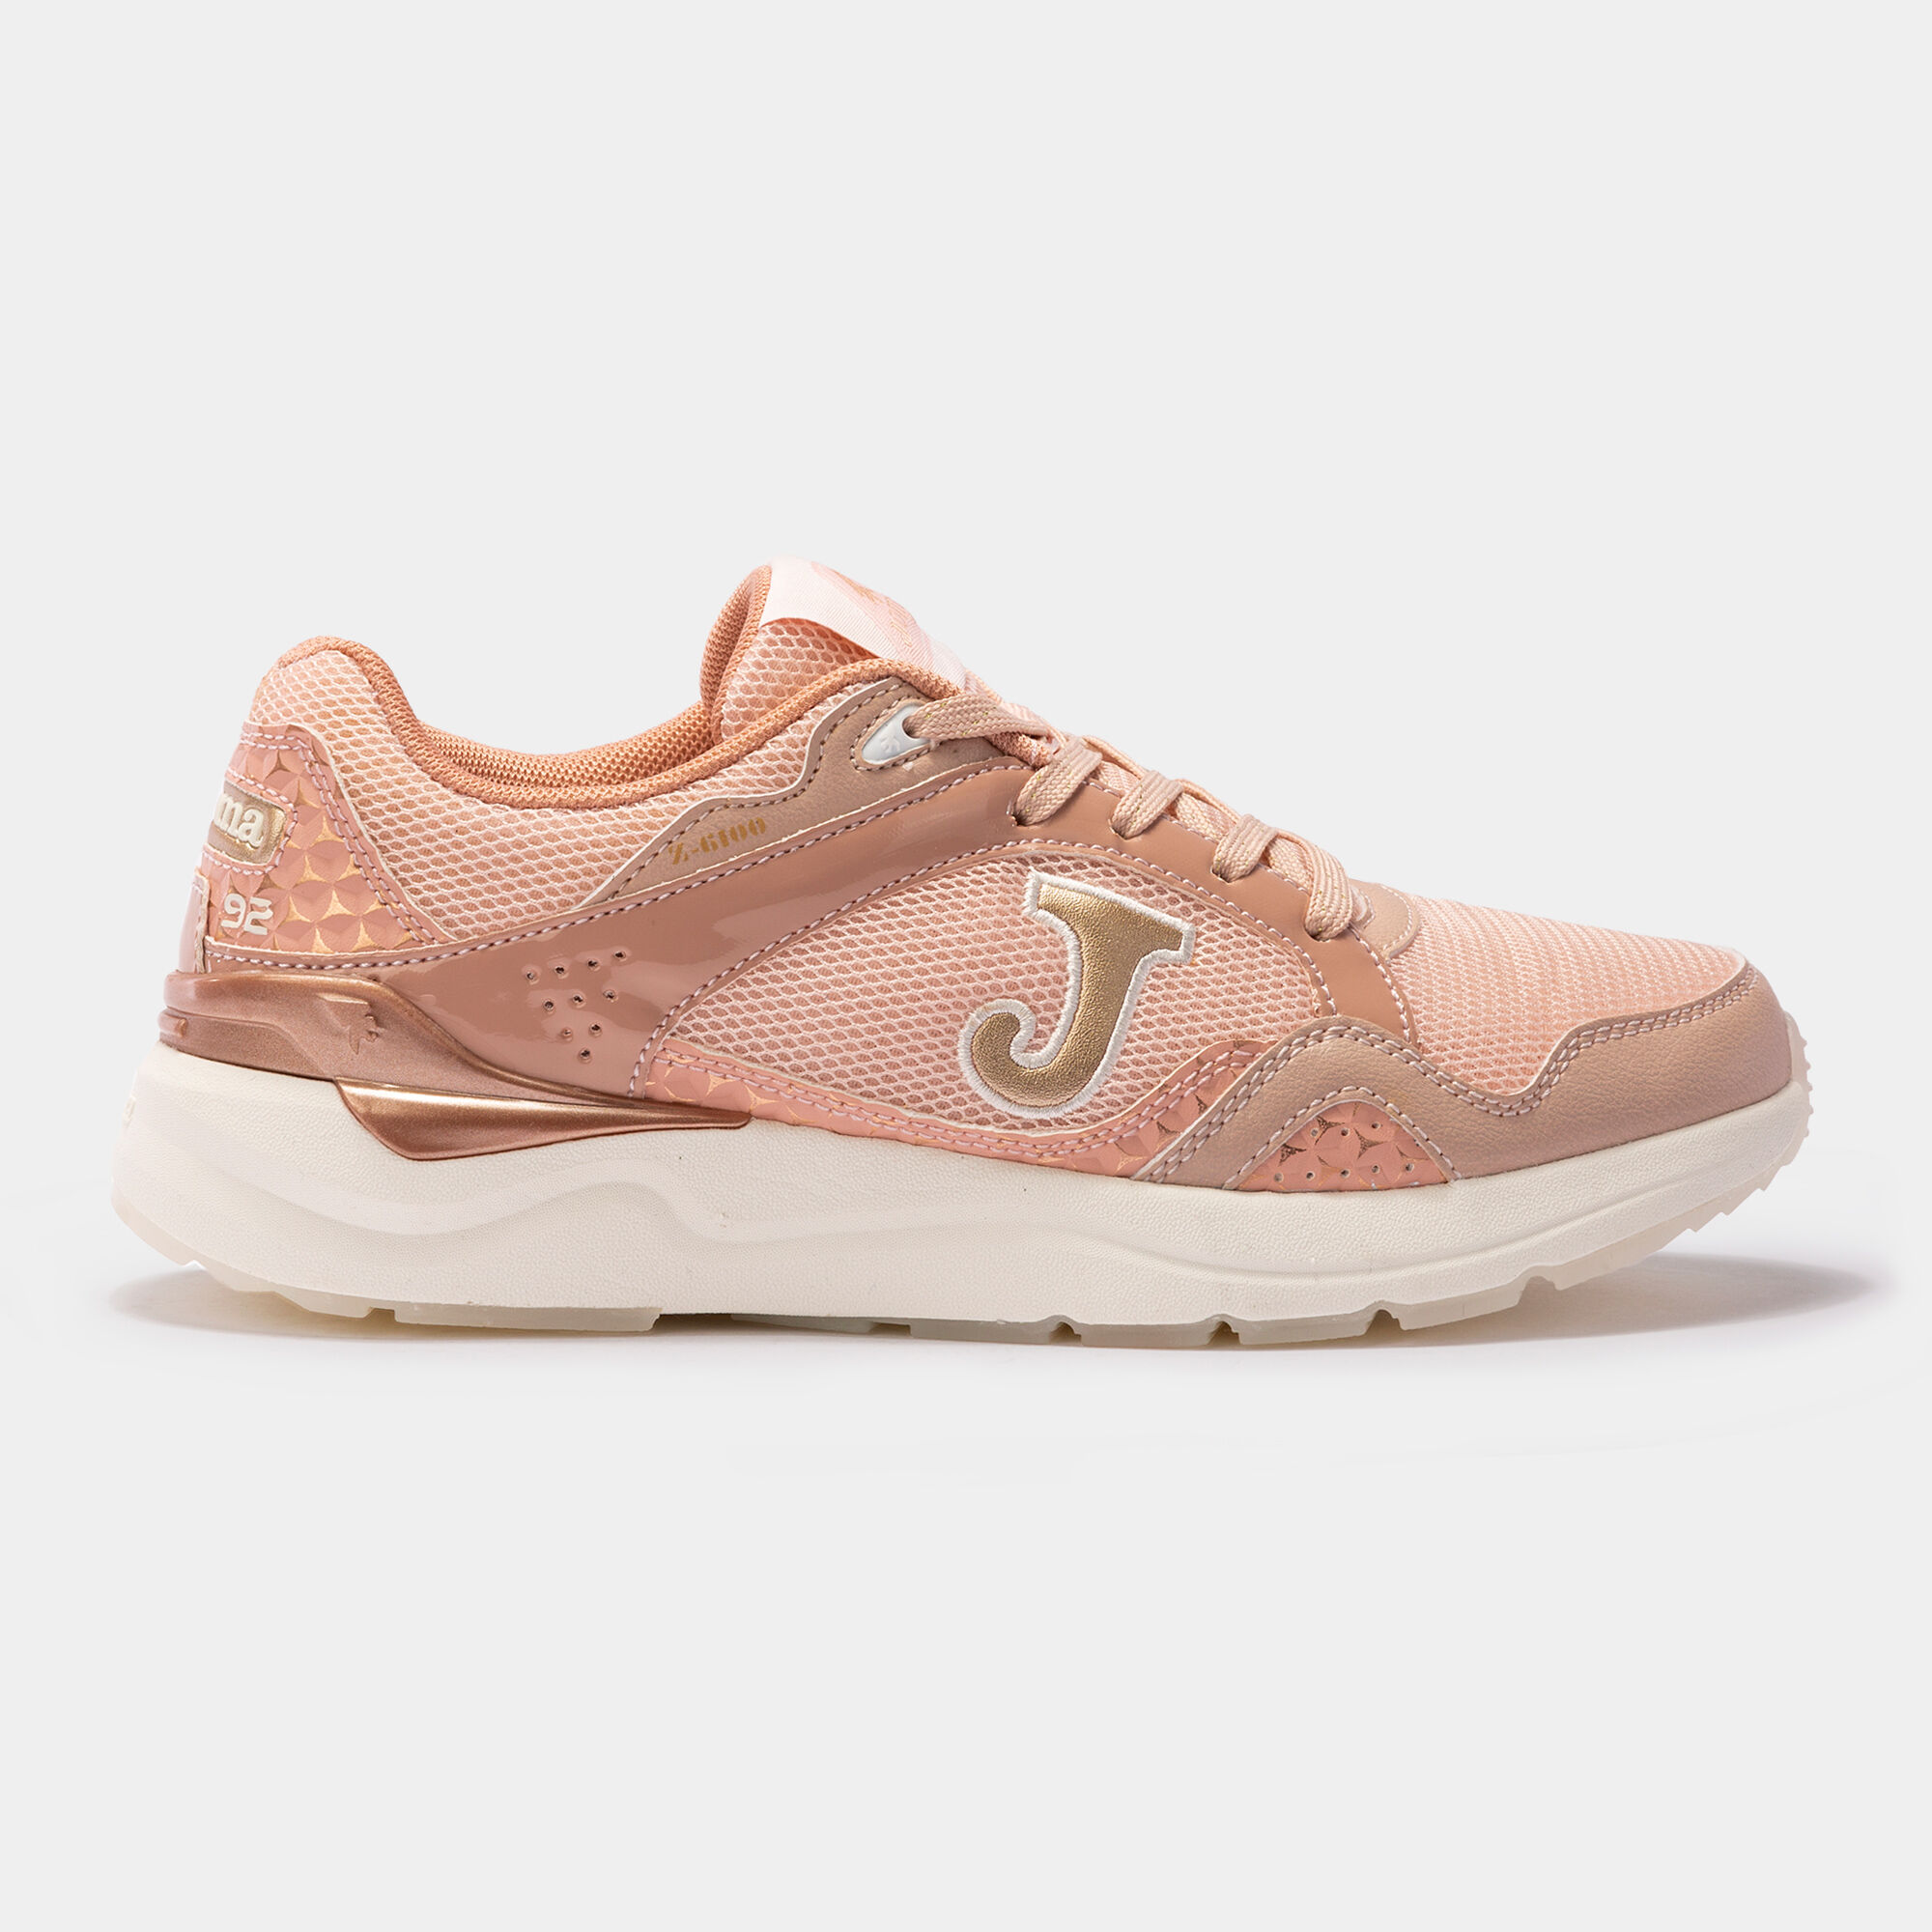 CHAUSSURES CASUAL C.6100 22 FEMME ROSE